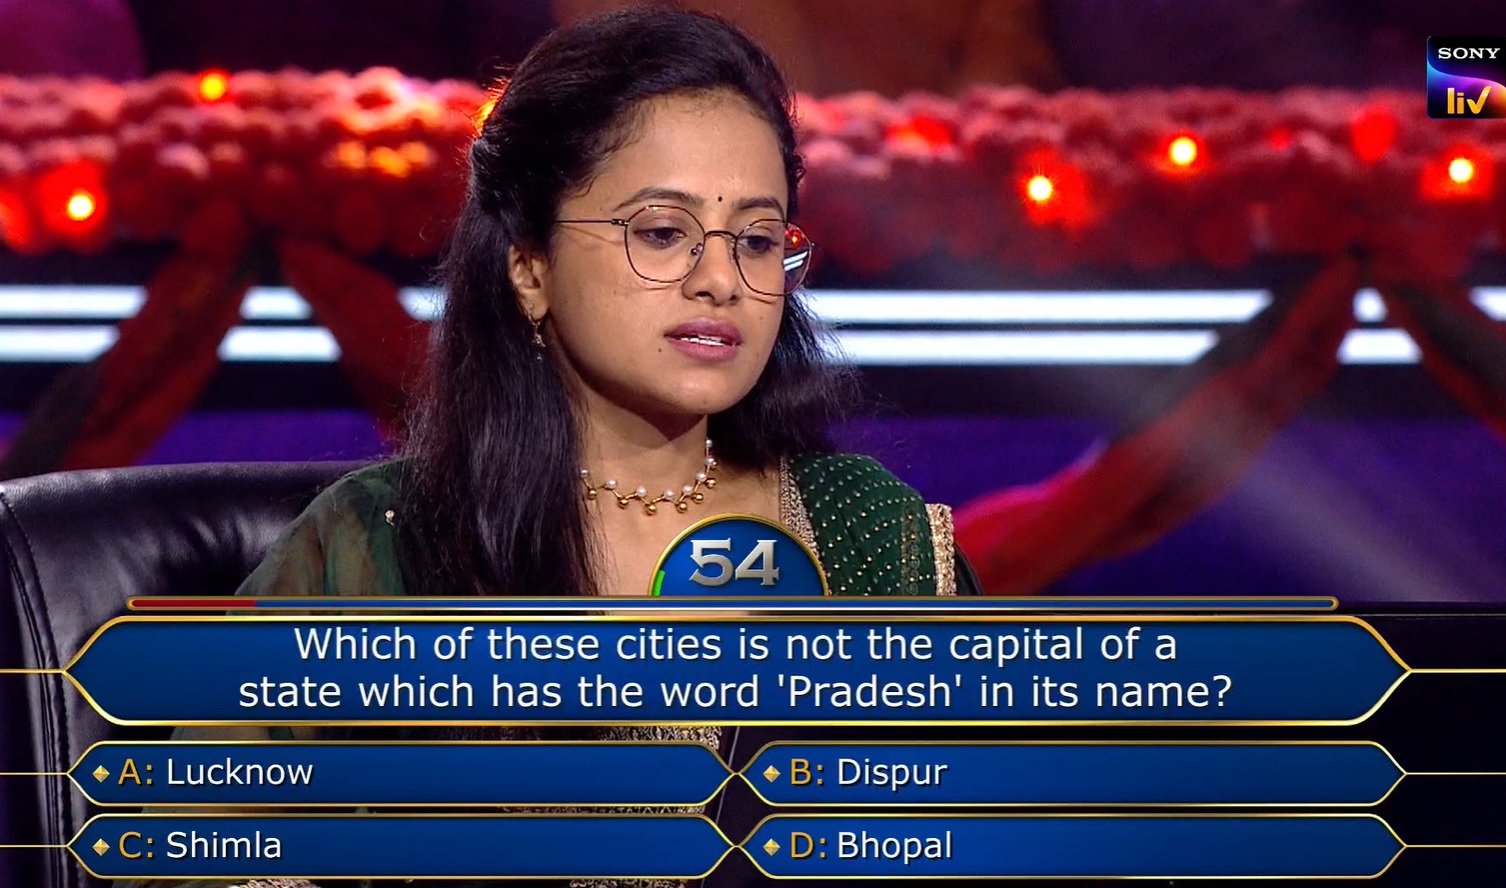 Ques : Which of these cities is not the capital of a state which has the word ‘Pradesh’ in its name?